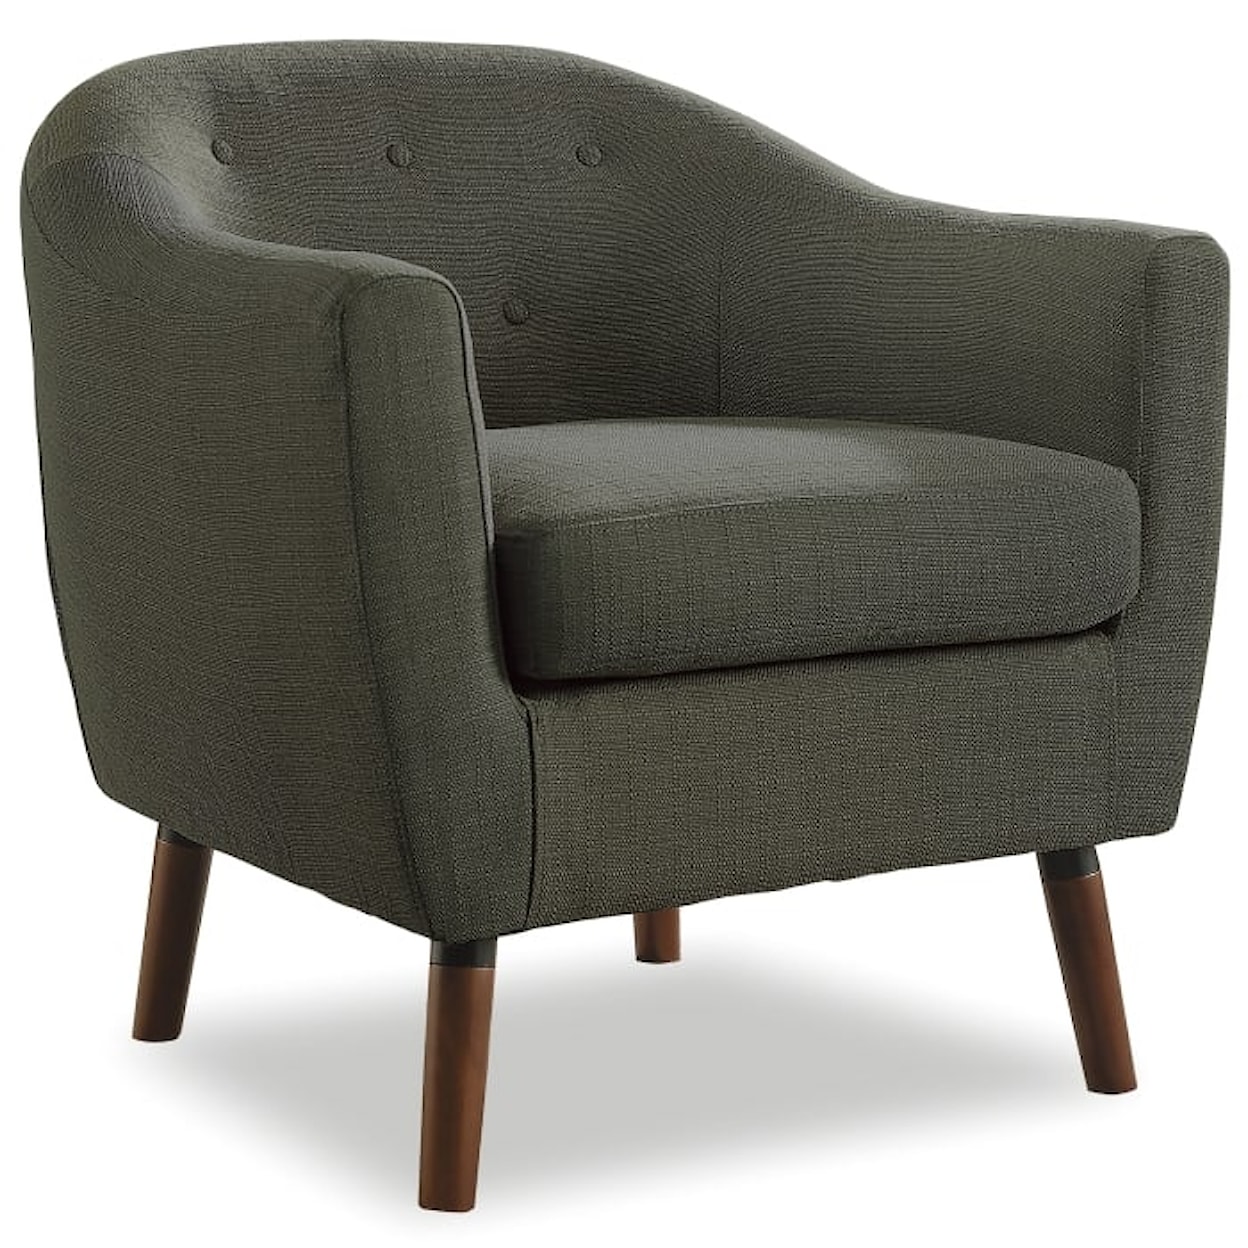 Homelegance Lucille Accent Chair